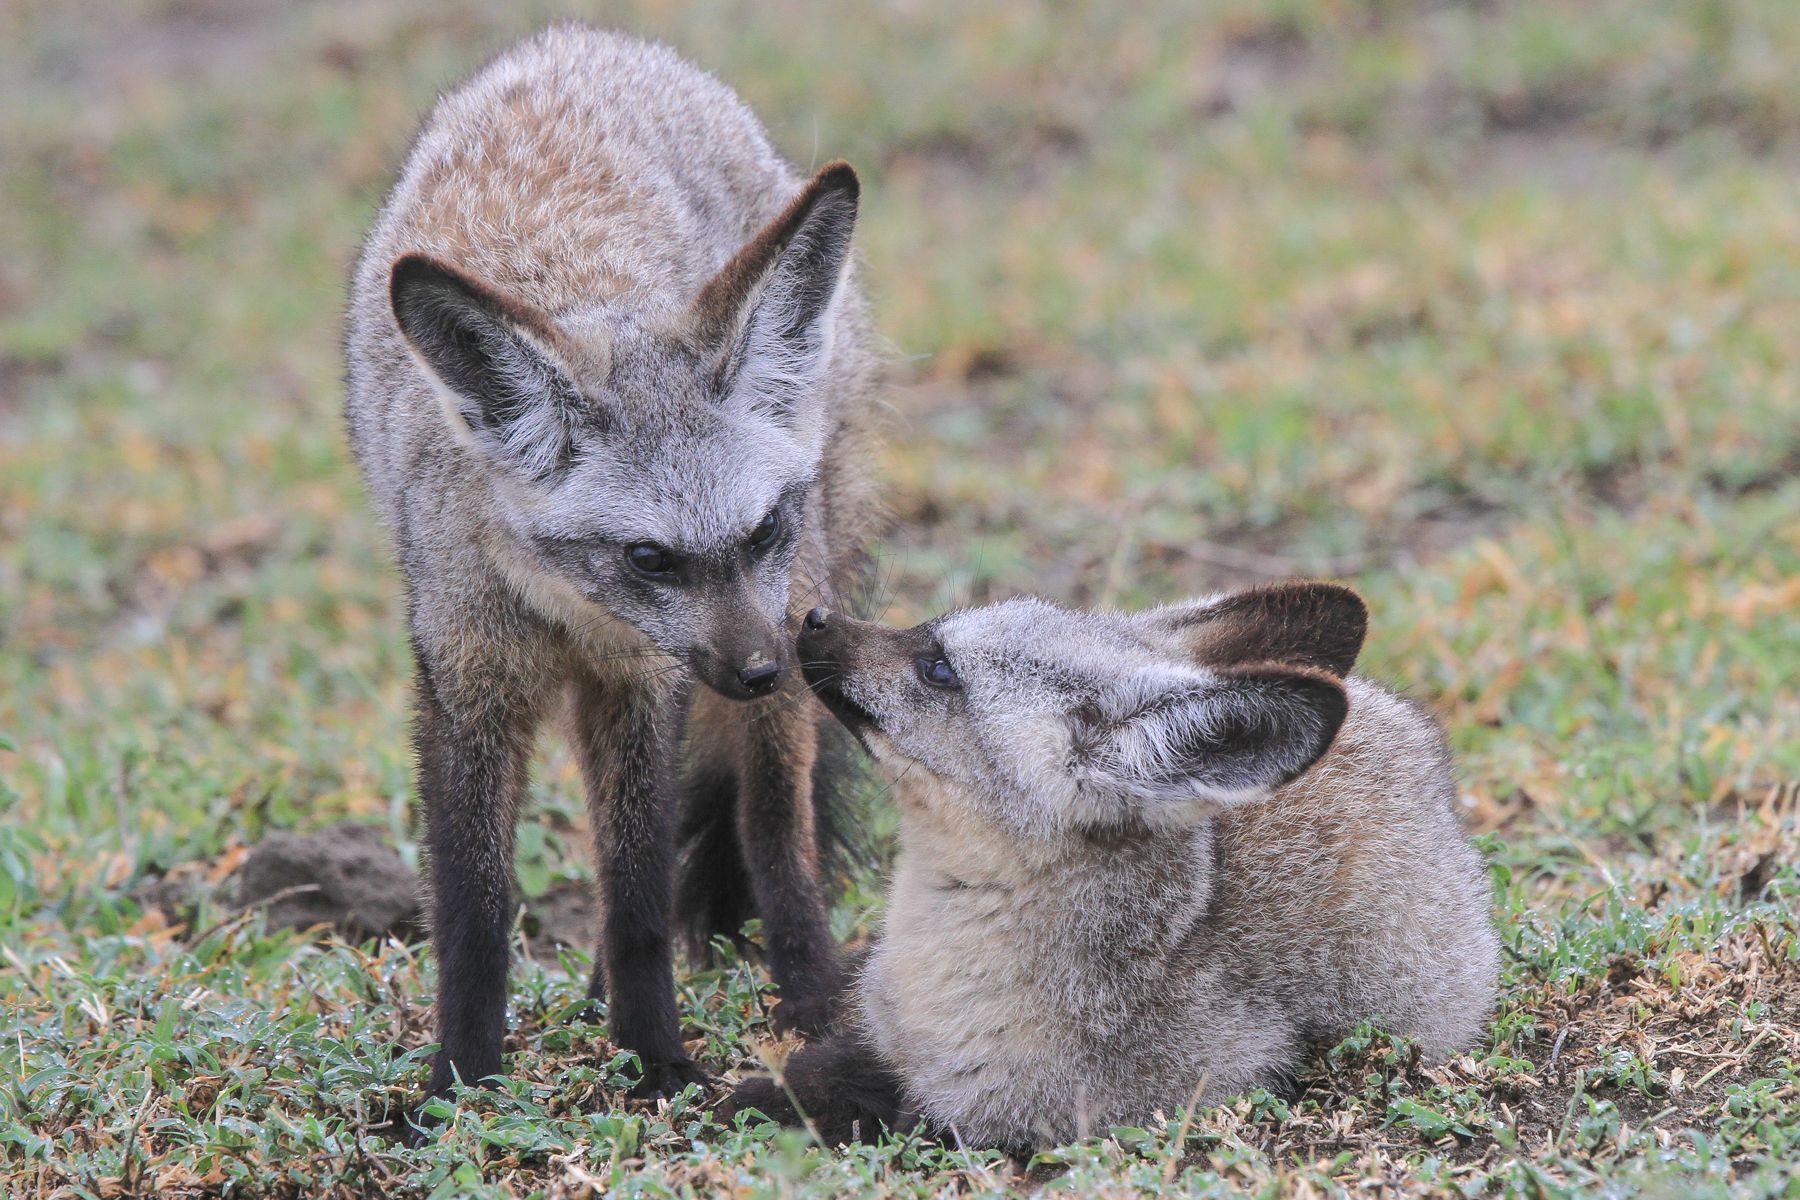 Bat-eared Foxes greet each other. Are those the cutest ears or what?